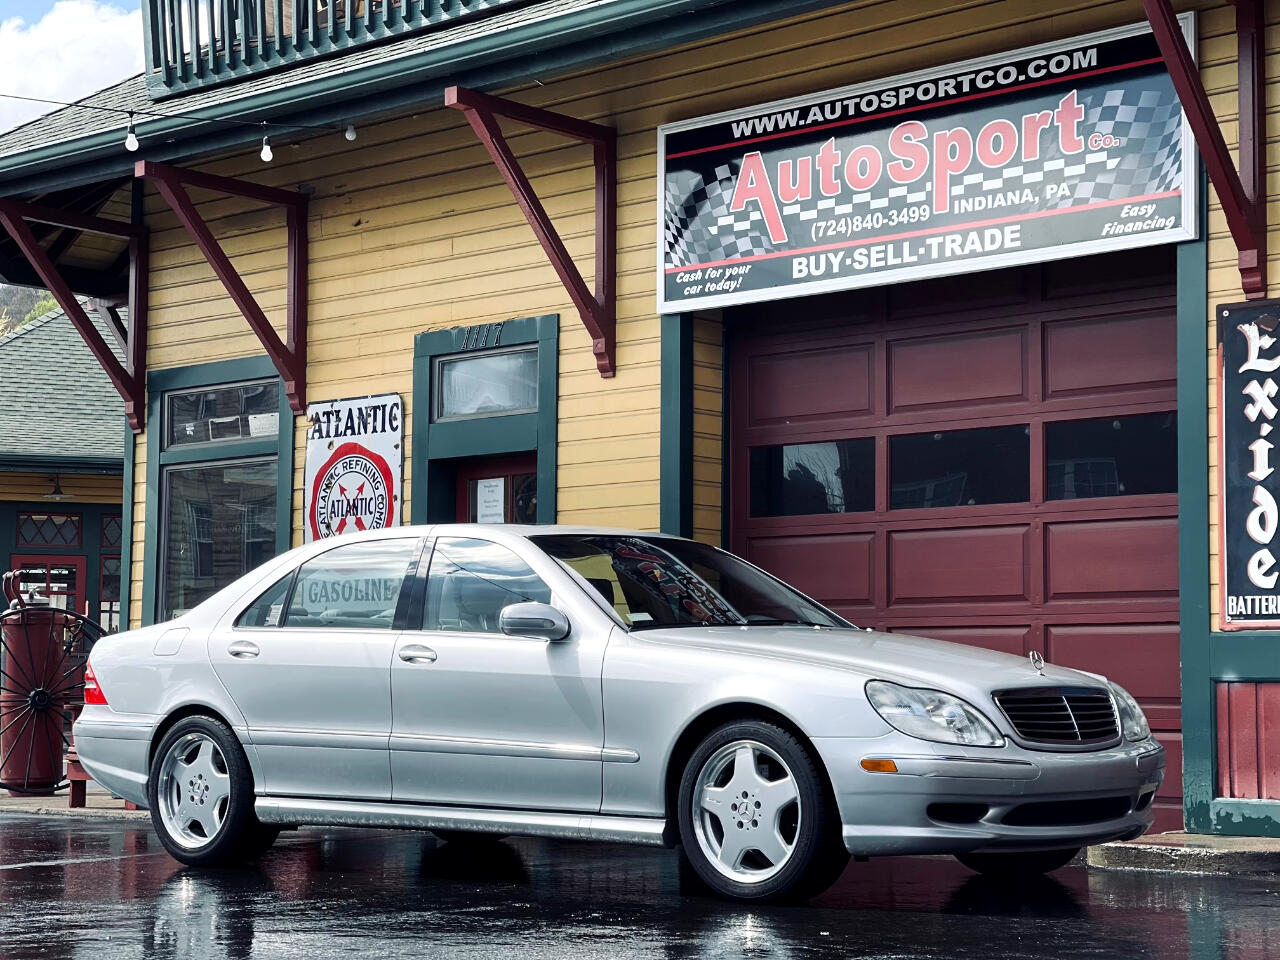 Used 2002 Mercedes-Benz S-Class S500 for Sale in Pittsburgh PA 15238  AutoSport Co.